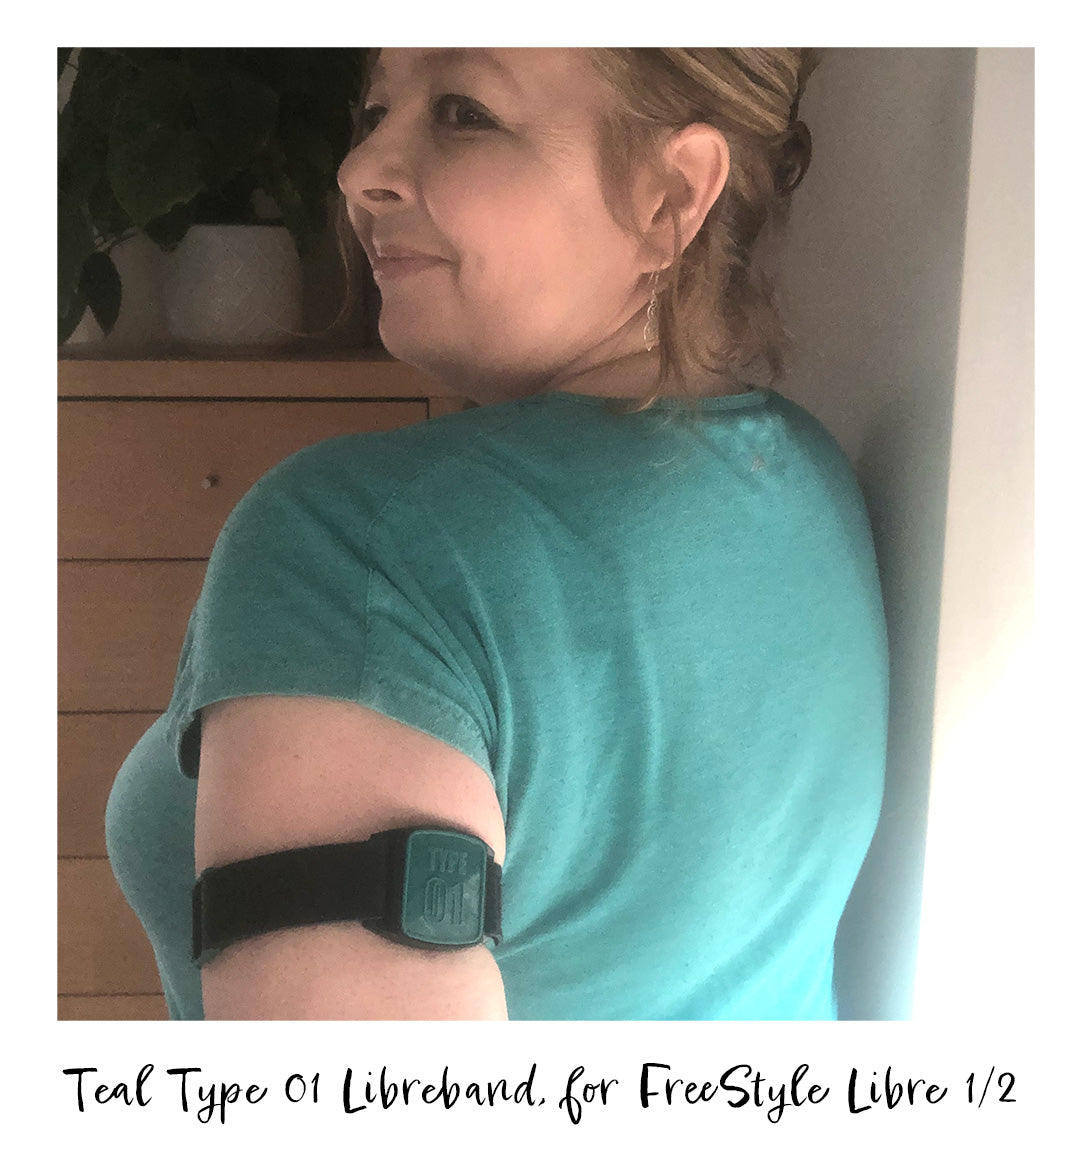 Libreband armband with teal Type 01 design worn on upper arm.